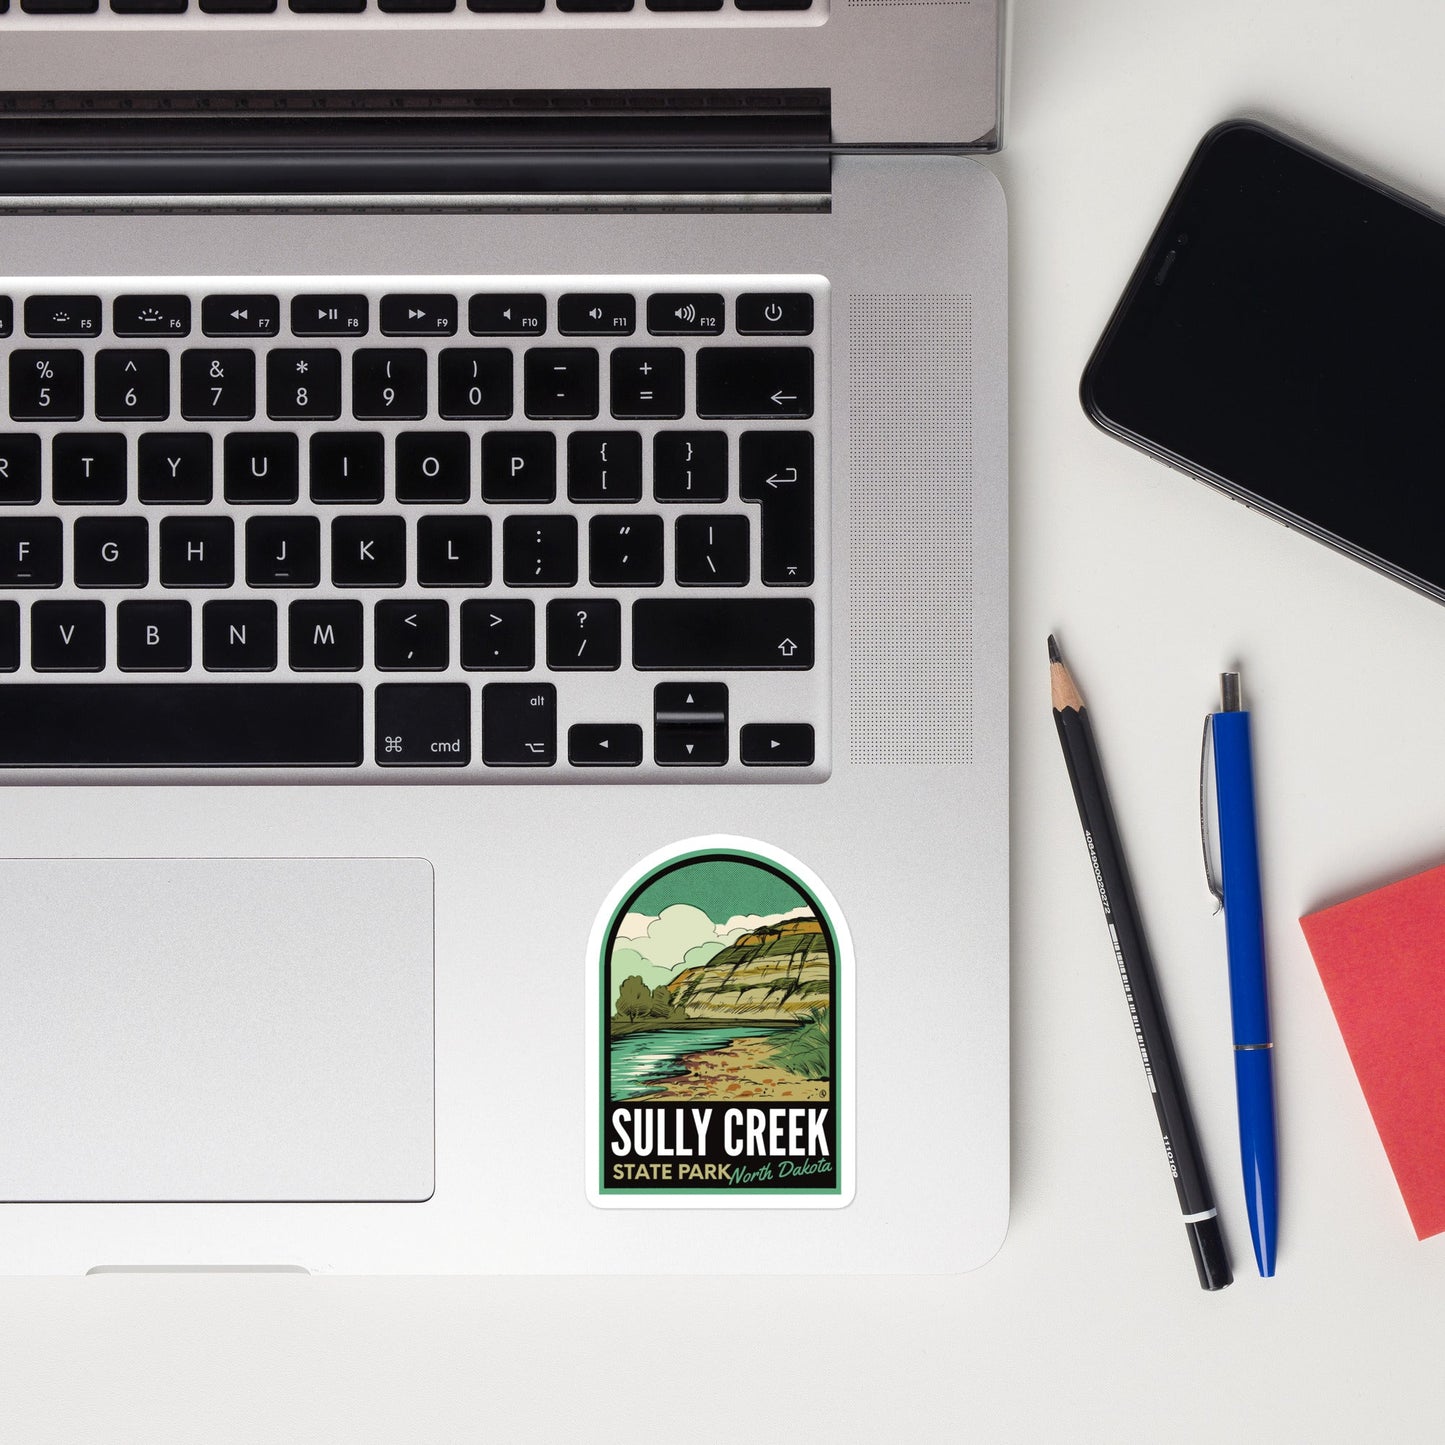 A sticker of Sully Creek State Park on a laptop